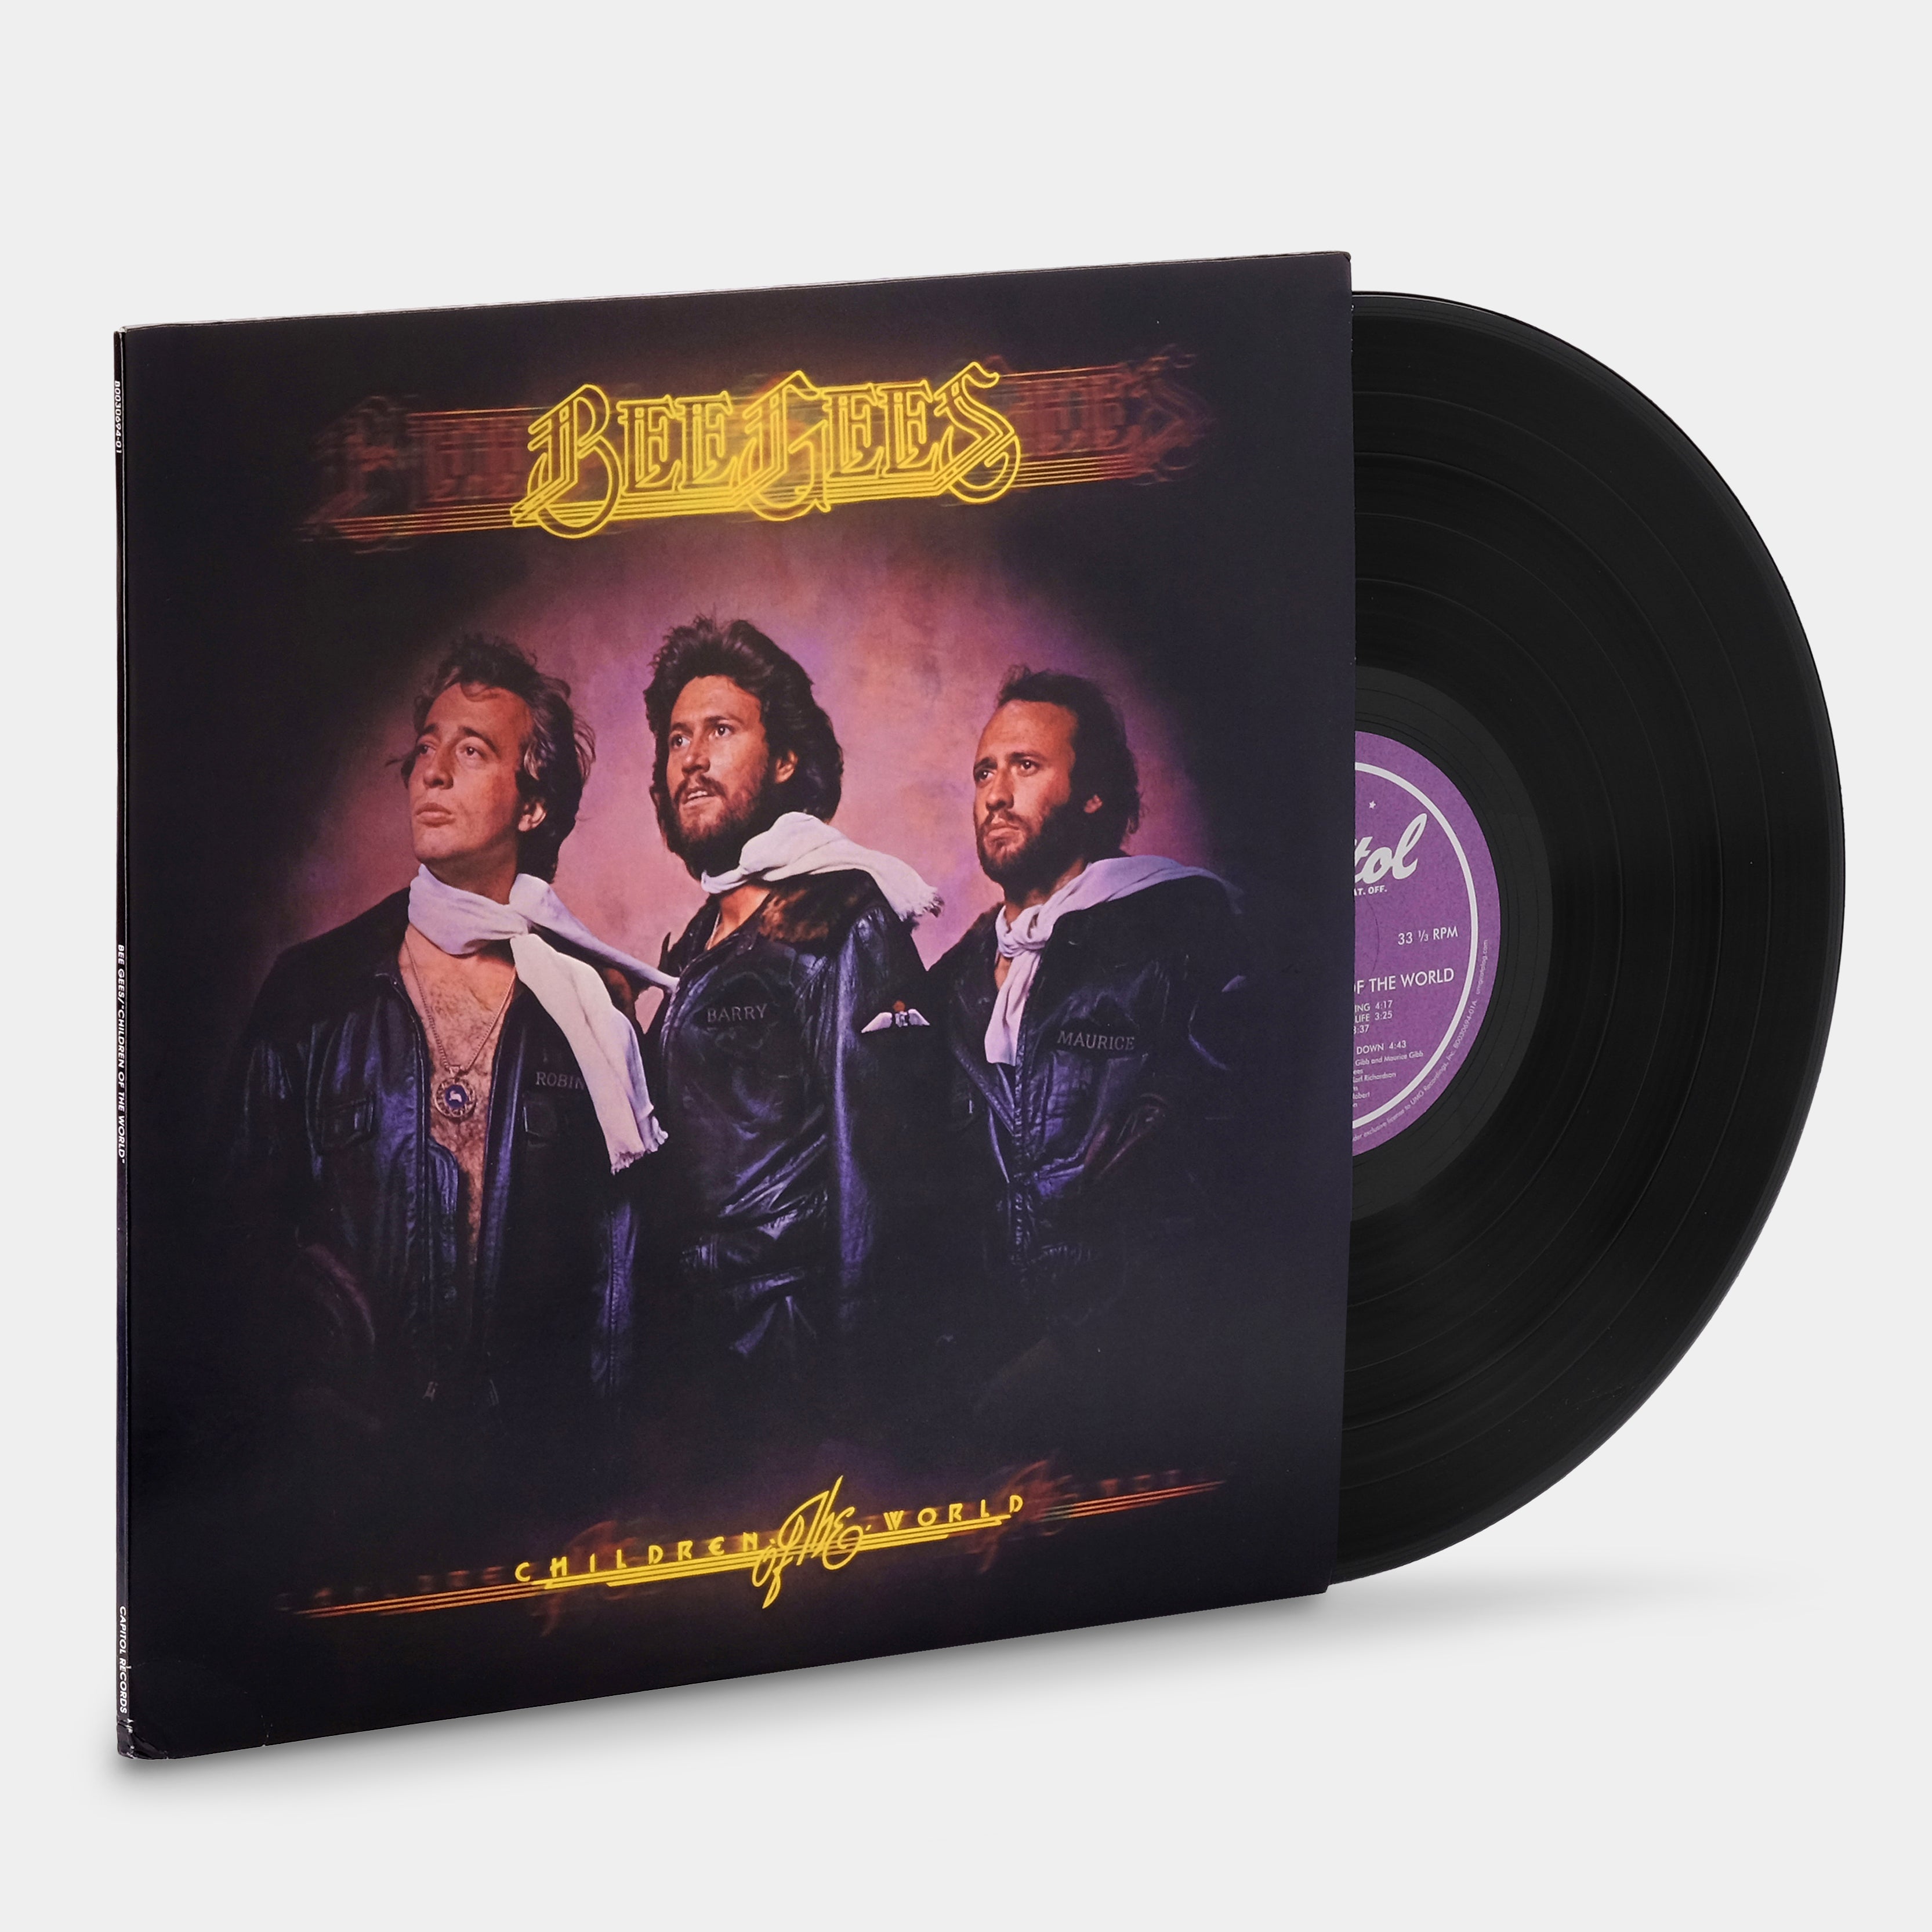 Bee Gees - Children Of The World LP Vinyl Record